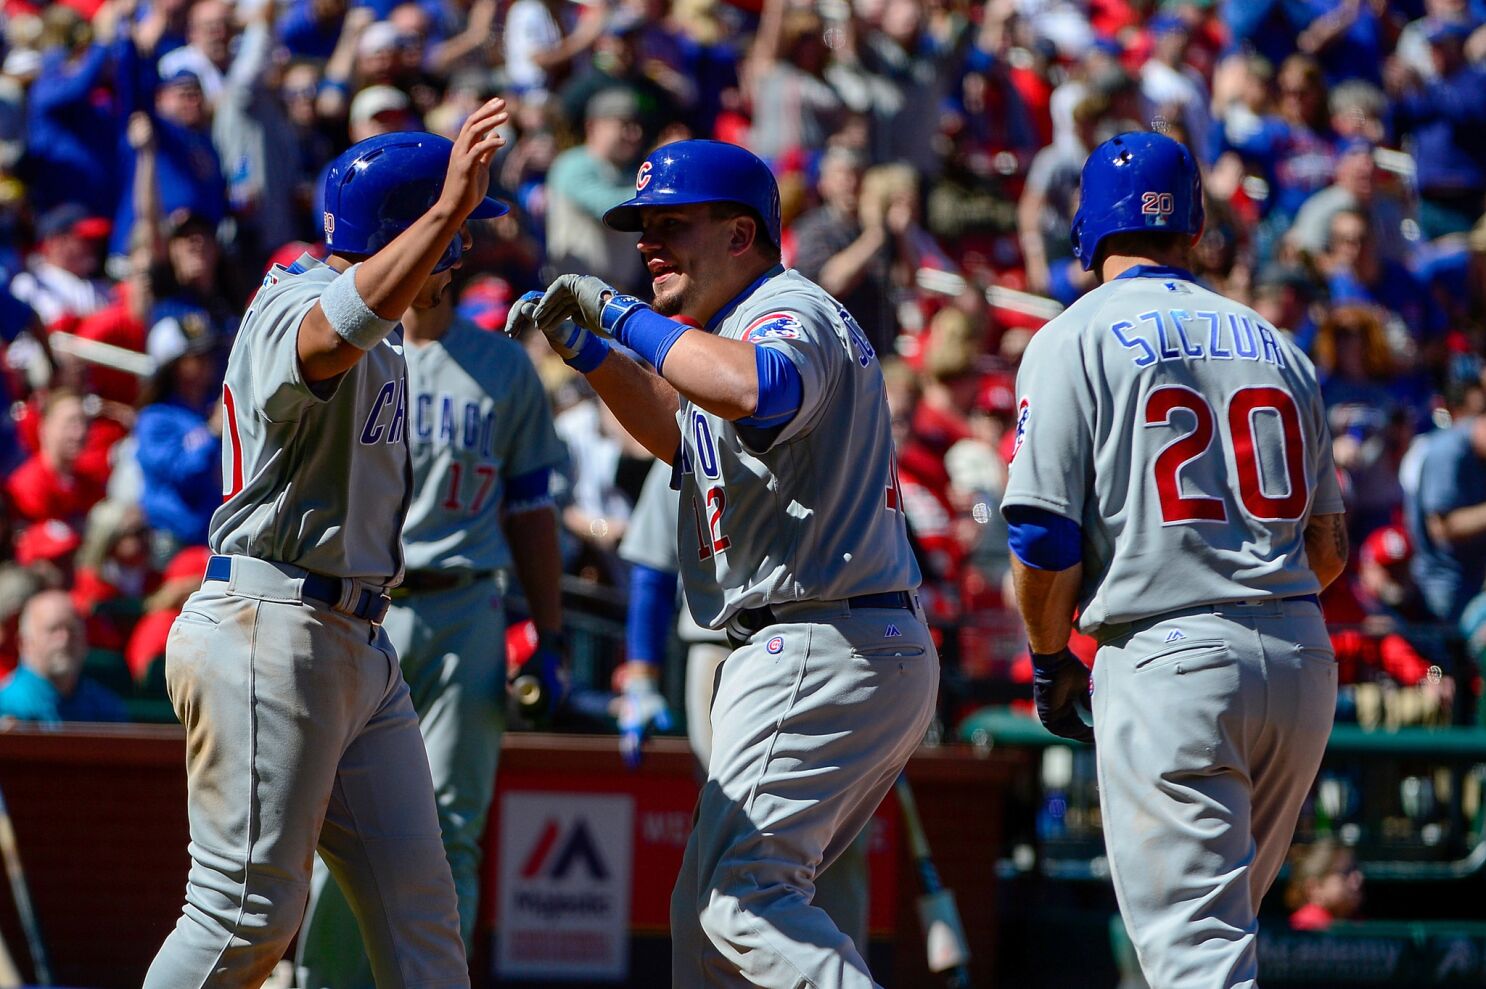 Cubs 11, Brewers 4: Schwarber's two homers, seven RBI help avoid sweep